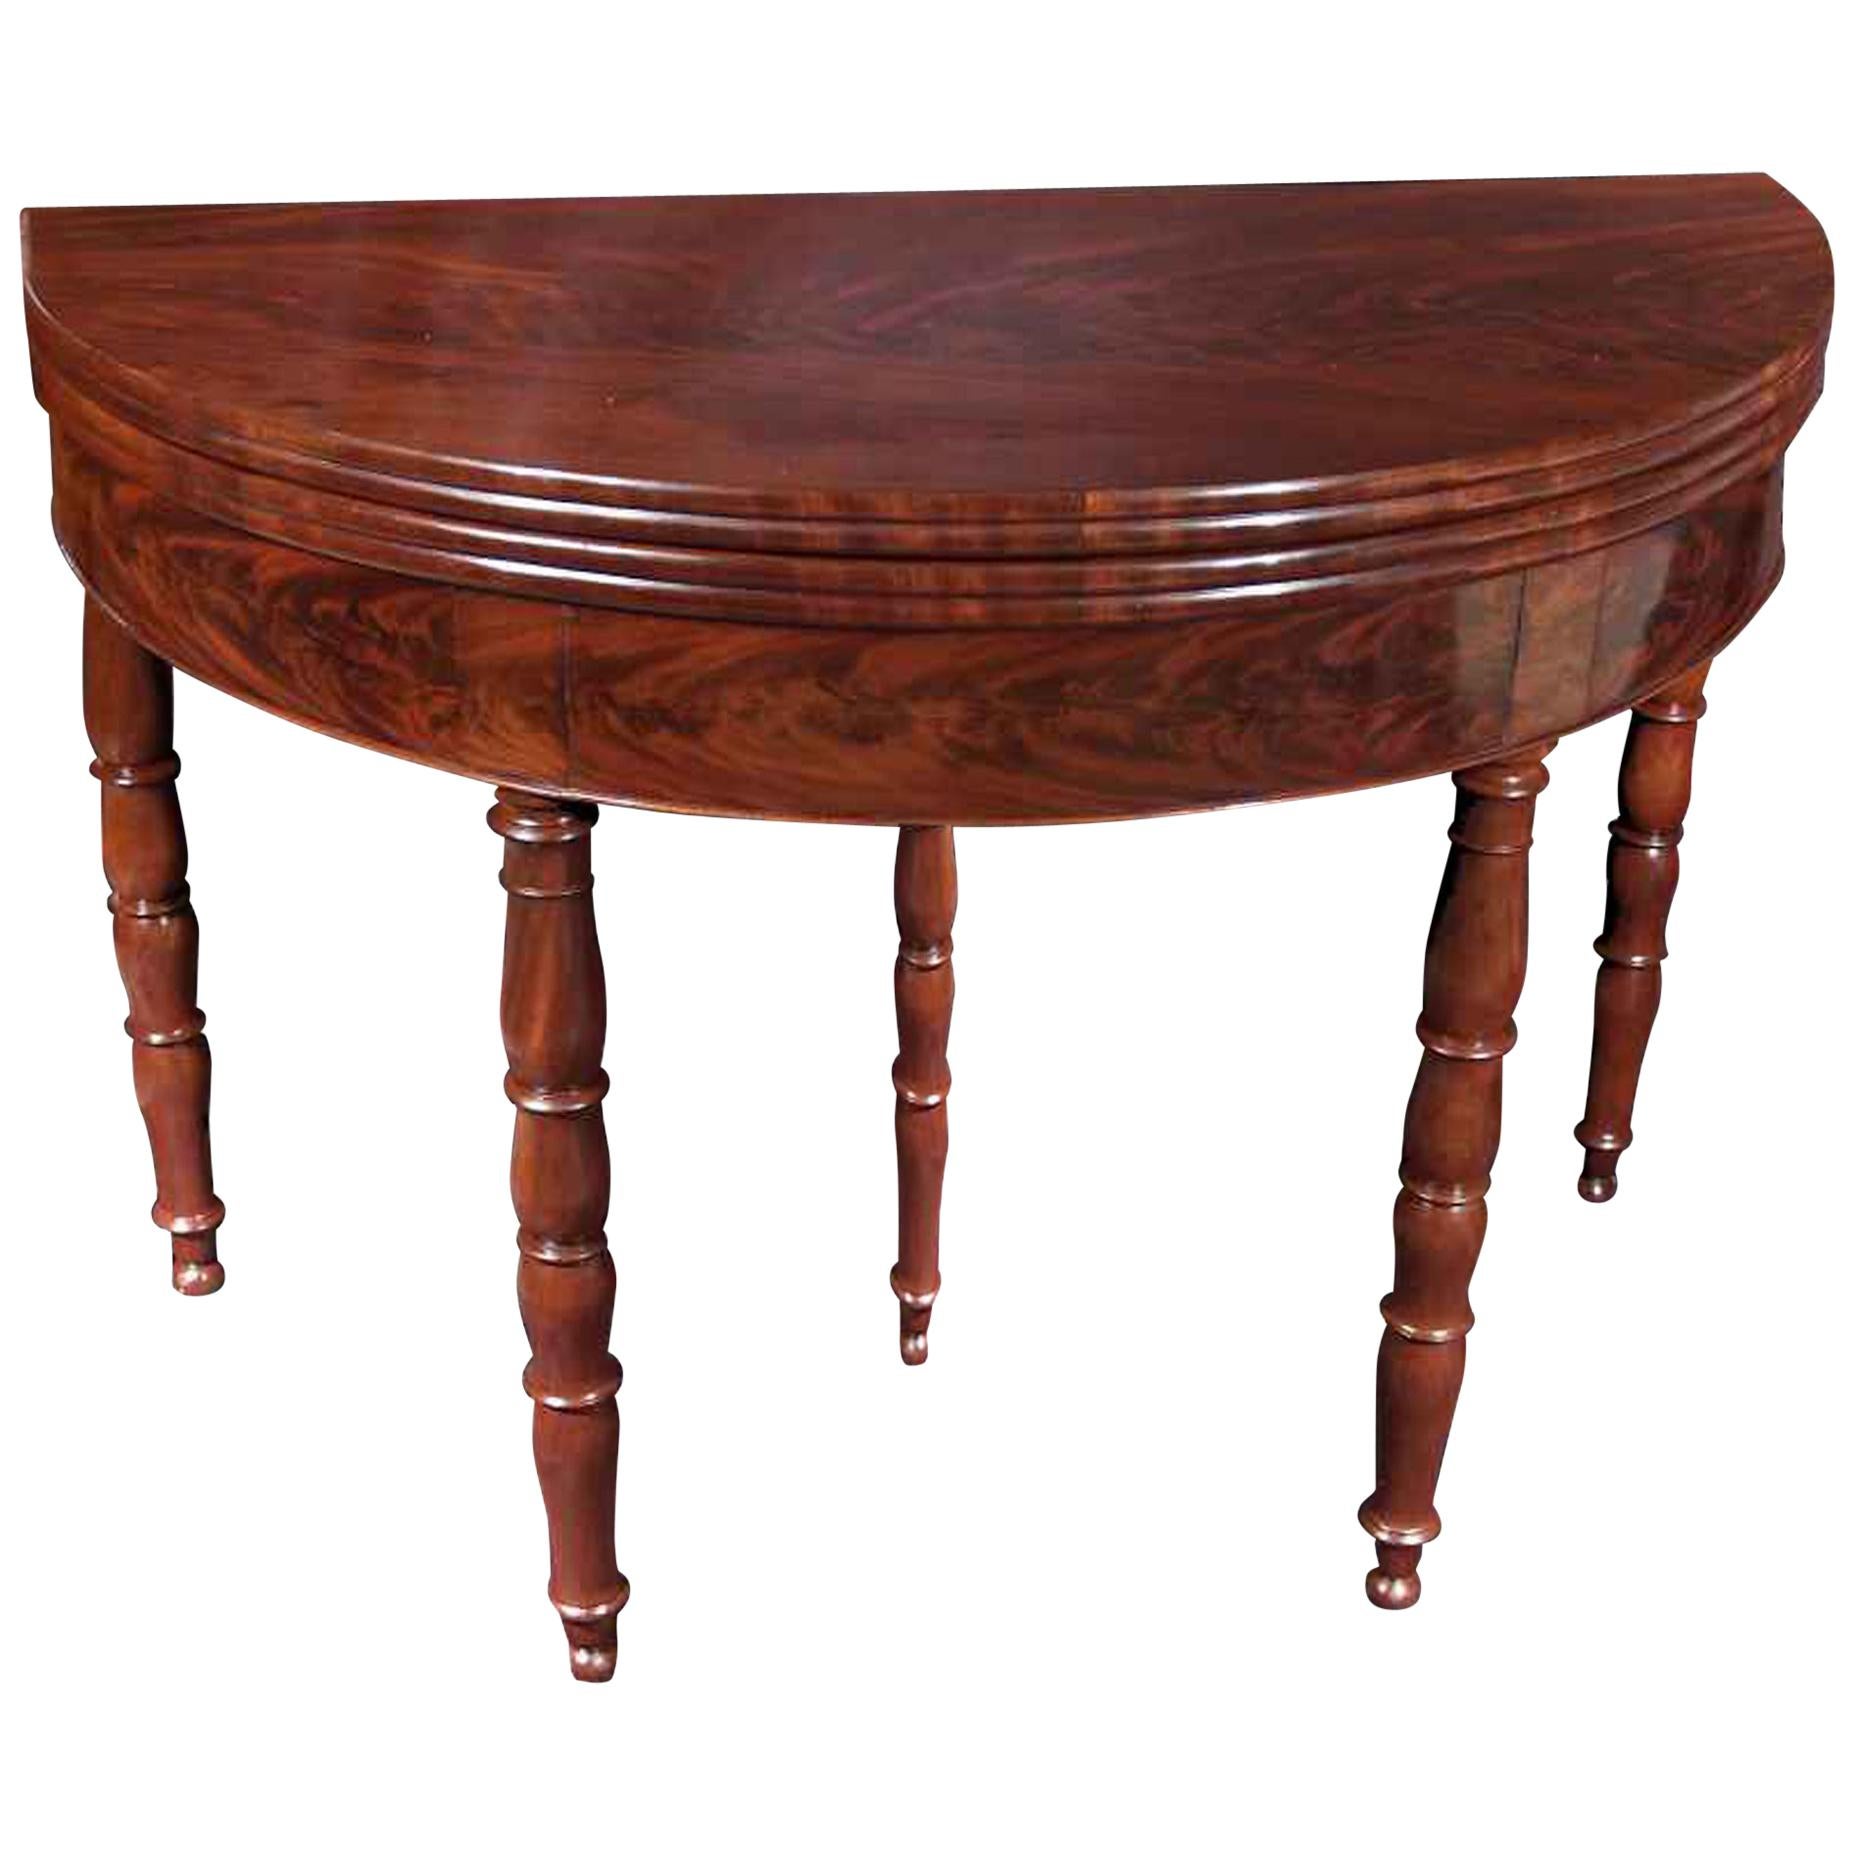 French Mid-19th Century French Charles X Style Crouch Mahogany Games Table For Sale